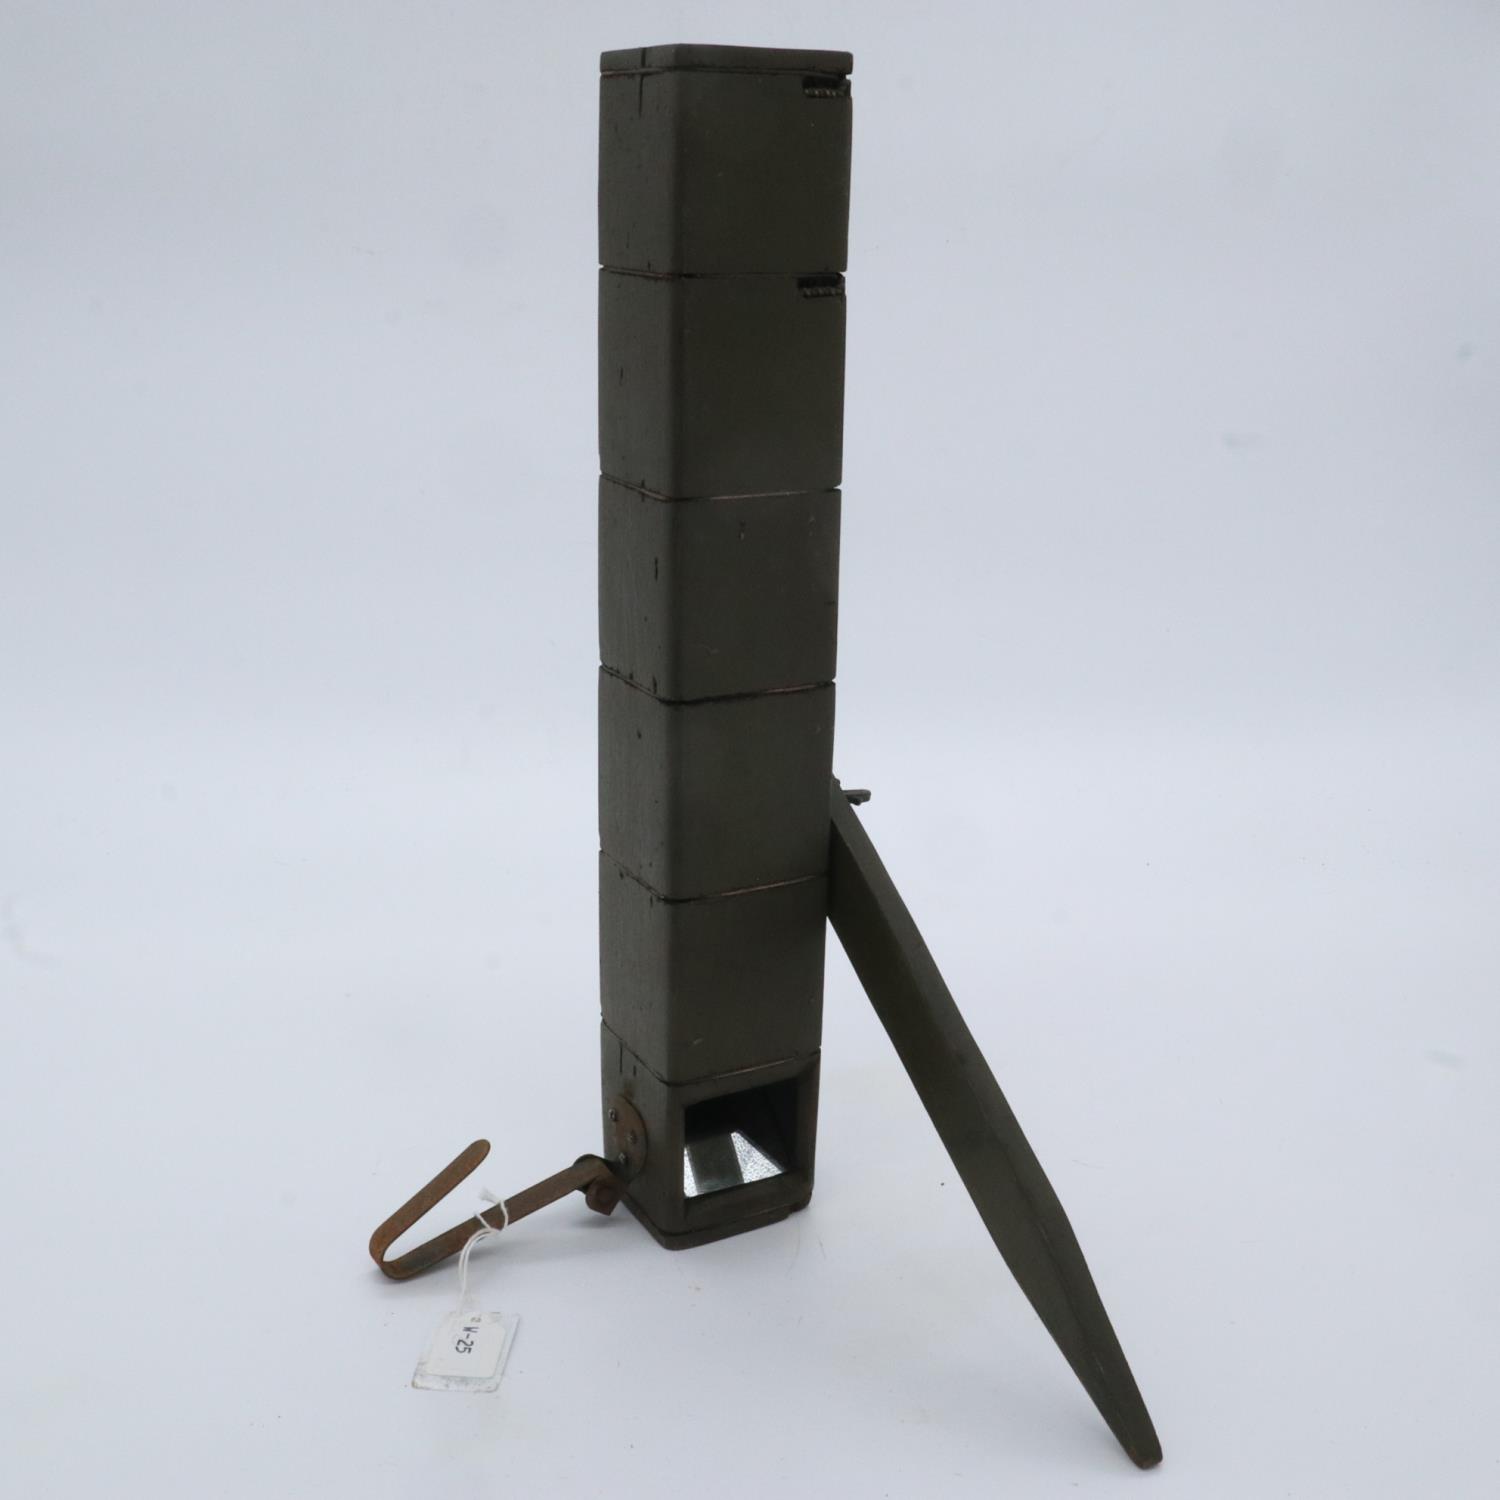 WWI British Trench Periscope. An officers Private Purchase from the Army and Navy Store, UK P&P